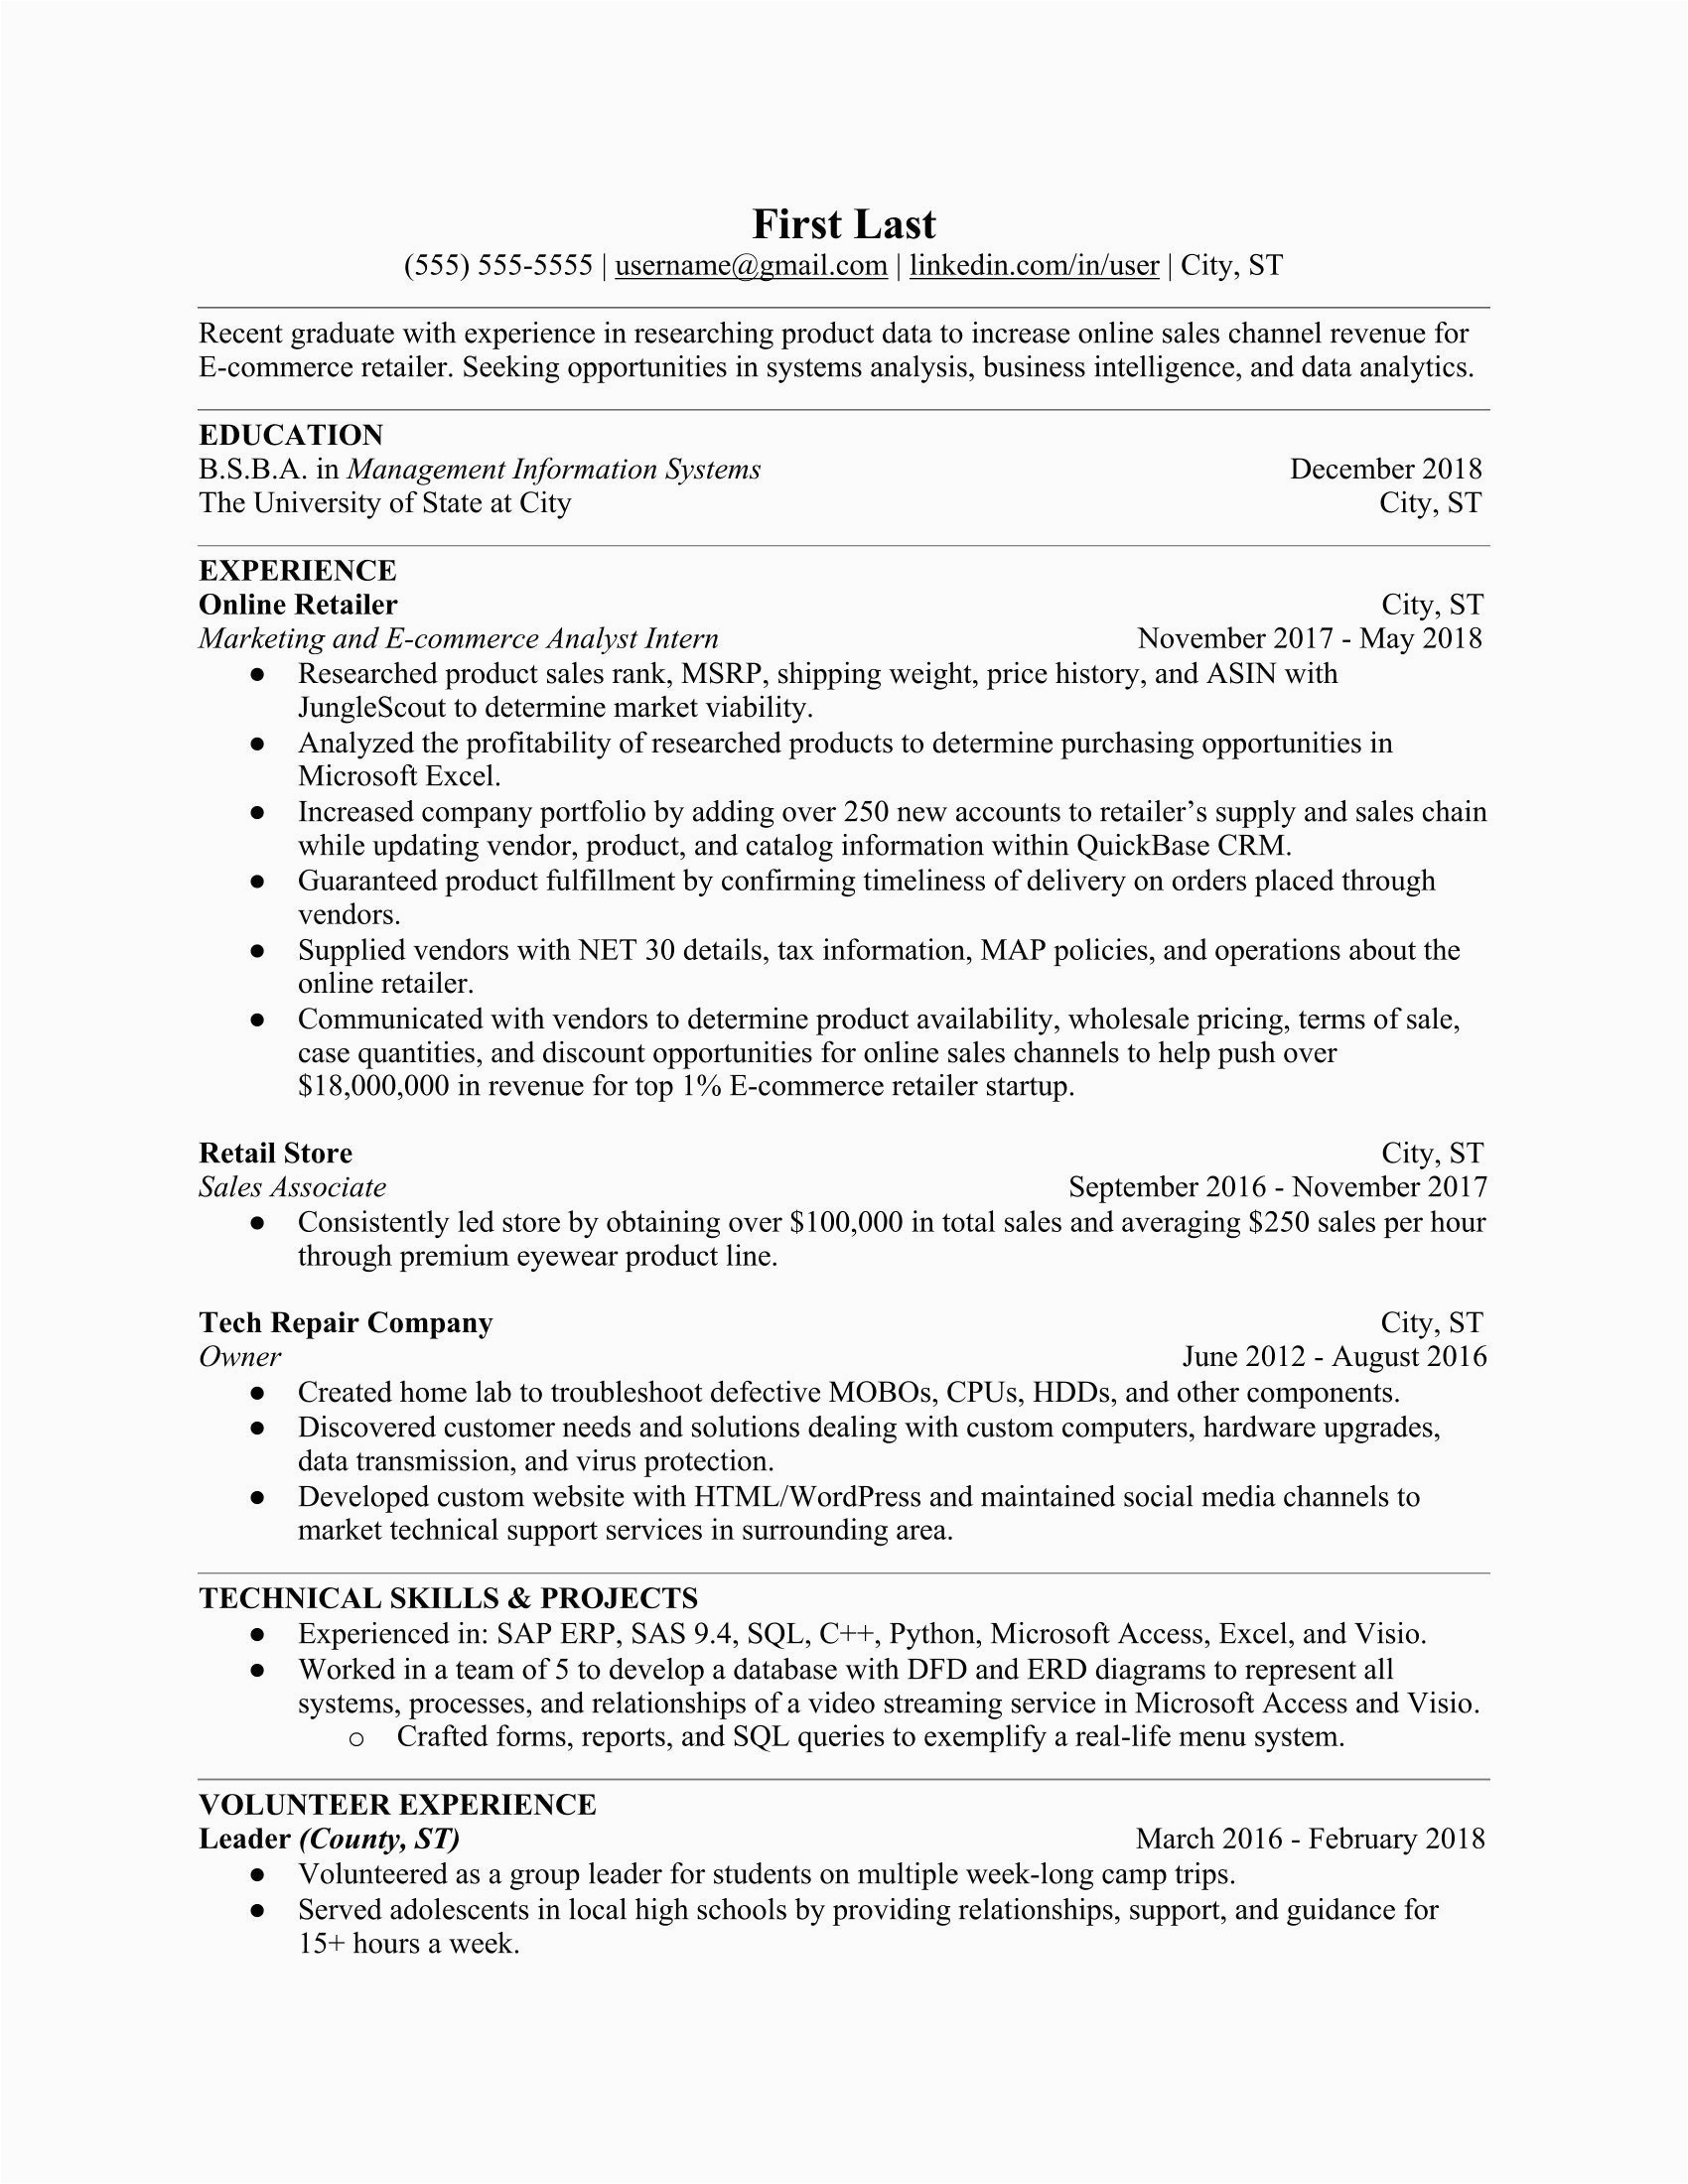 Resume Samples College Graduate Entry Level Entry Level It Resume for A Recent College Graduate Resumes